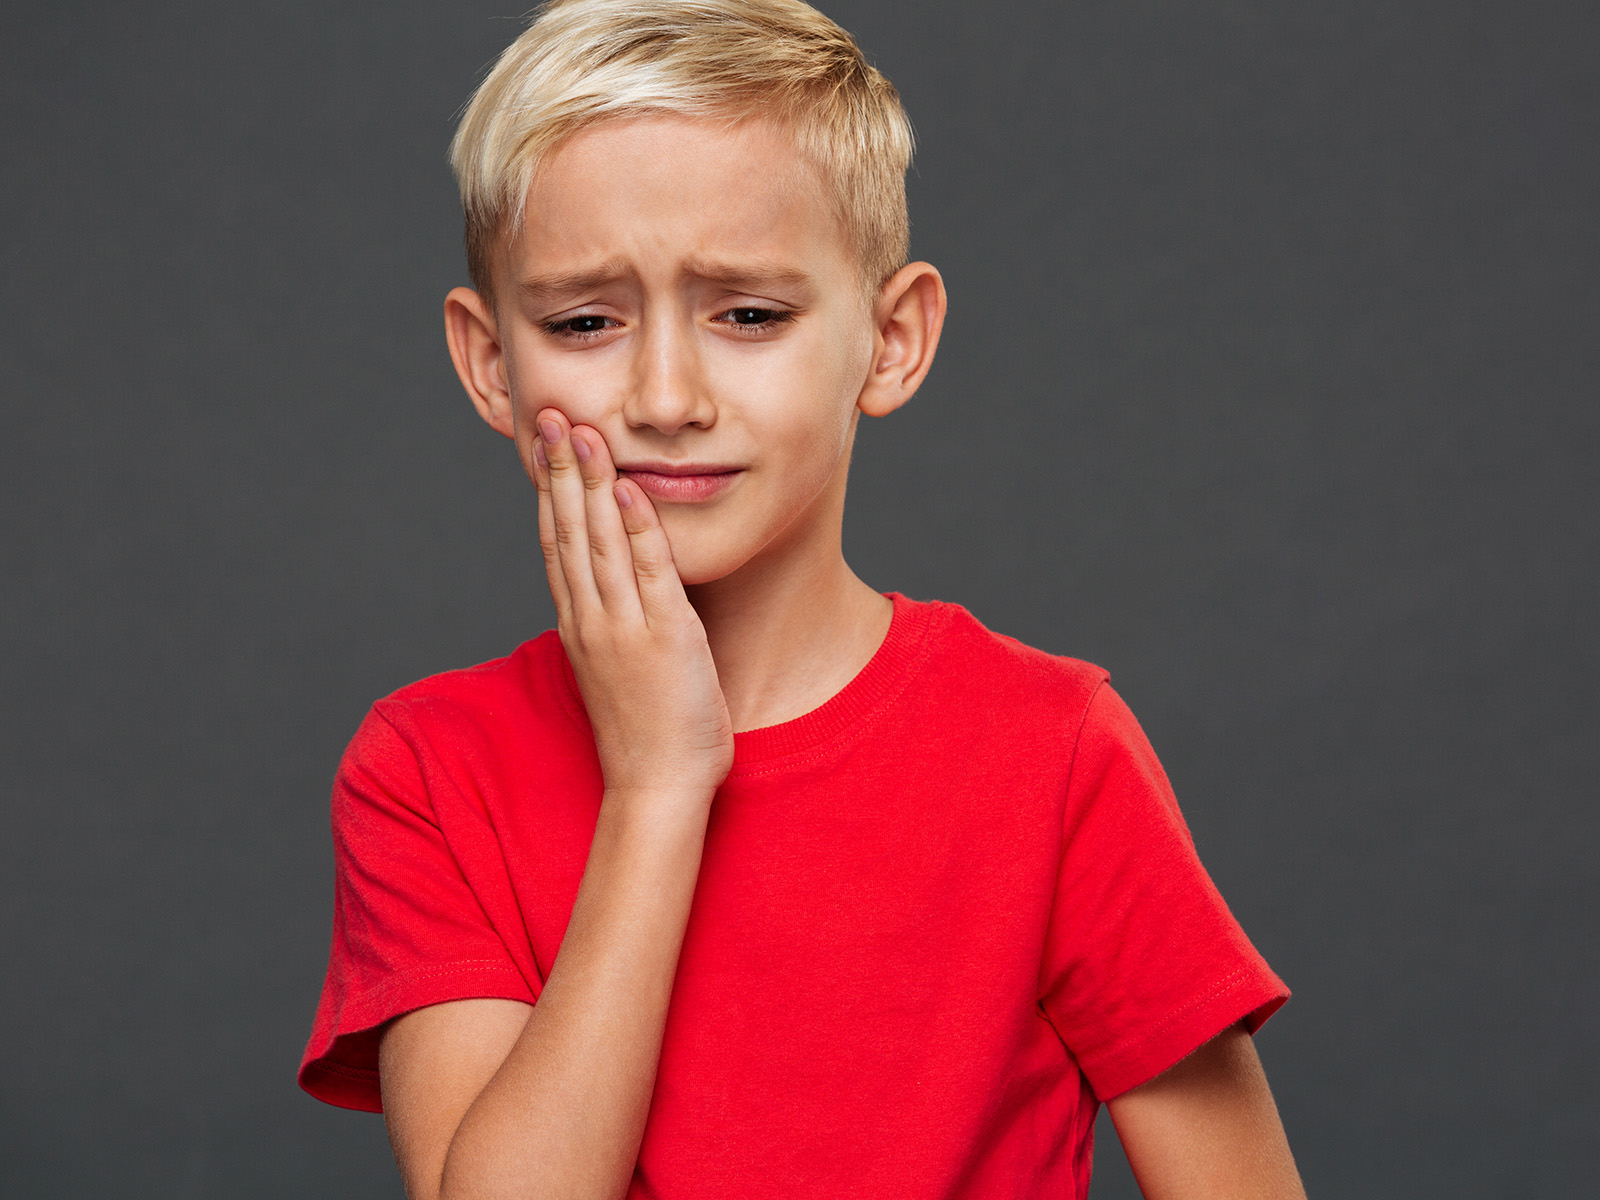 Tips To Help Your Child Overcome Dental Anxiety